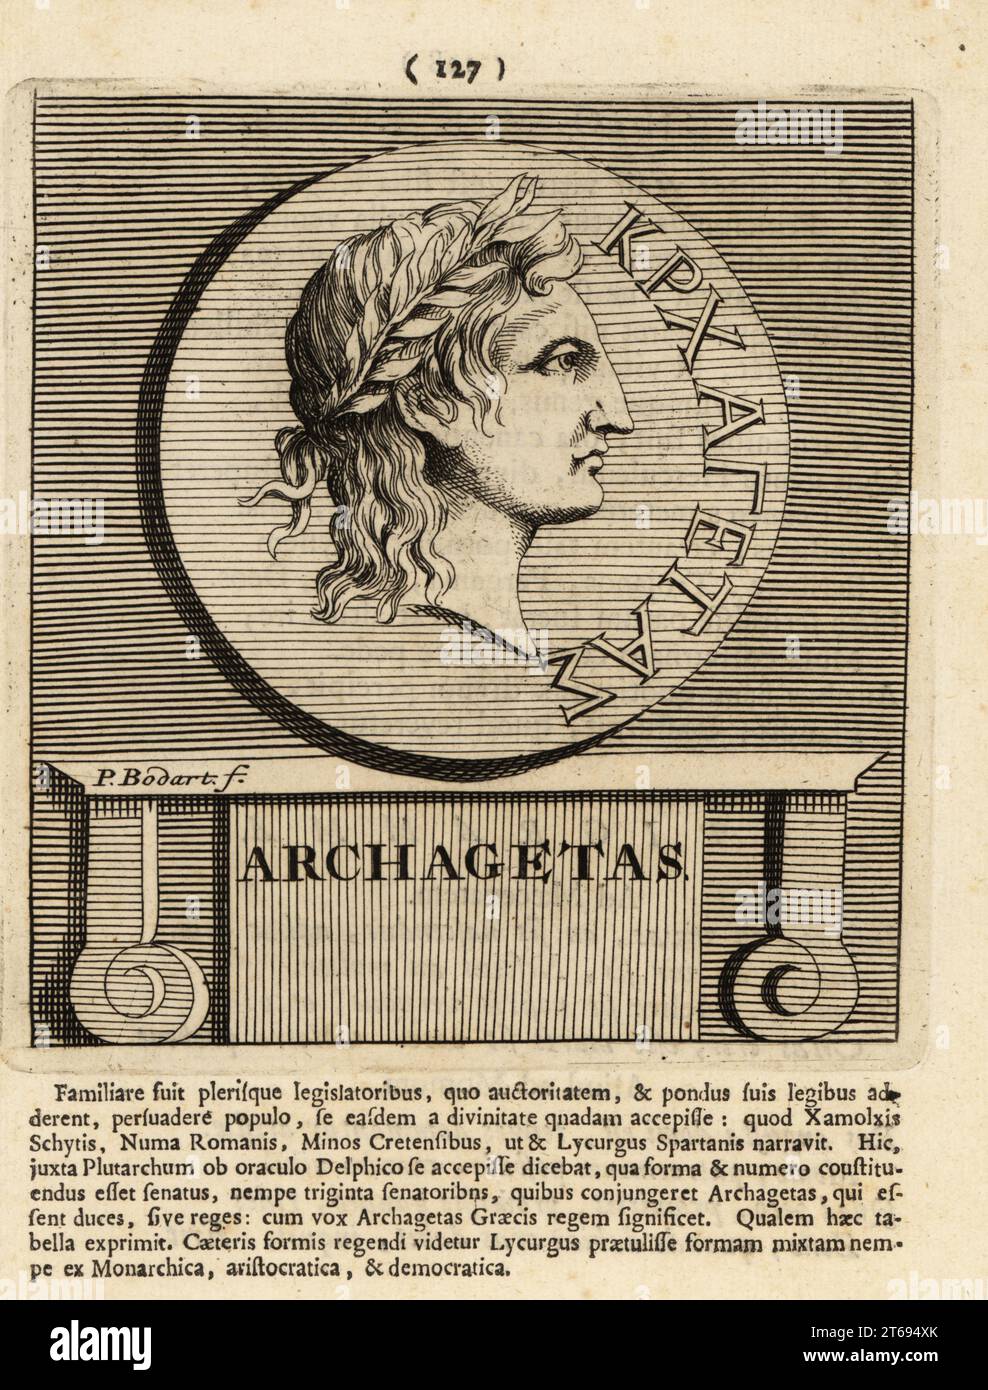 Apollo Archegetes in laurel wreath. An epithet of the Greek god Apollo, god of oracles, healing, archery, music and arts, sunlight, and knowledge, worshipped in several locations including Naxos, Sicily. Archagetas. Copperplate engraving by Pieter Bodart (1676-1712) from Henricus Spoors Deorum et Heroum, Virorum et Mulierum Illustrium Imagines Antiquae Illustatae, Gods and Heroes, Men and Women, Illustrated with Antique Images, Petrum, Amsterdam, 1715. First published as Favissæ utriusque antiquitatis tam Romanæ quam Græcæ in 1707. Henricus Spoor was a Dutch physician, classical scholar, poet Stock Photo